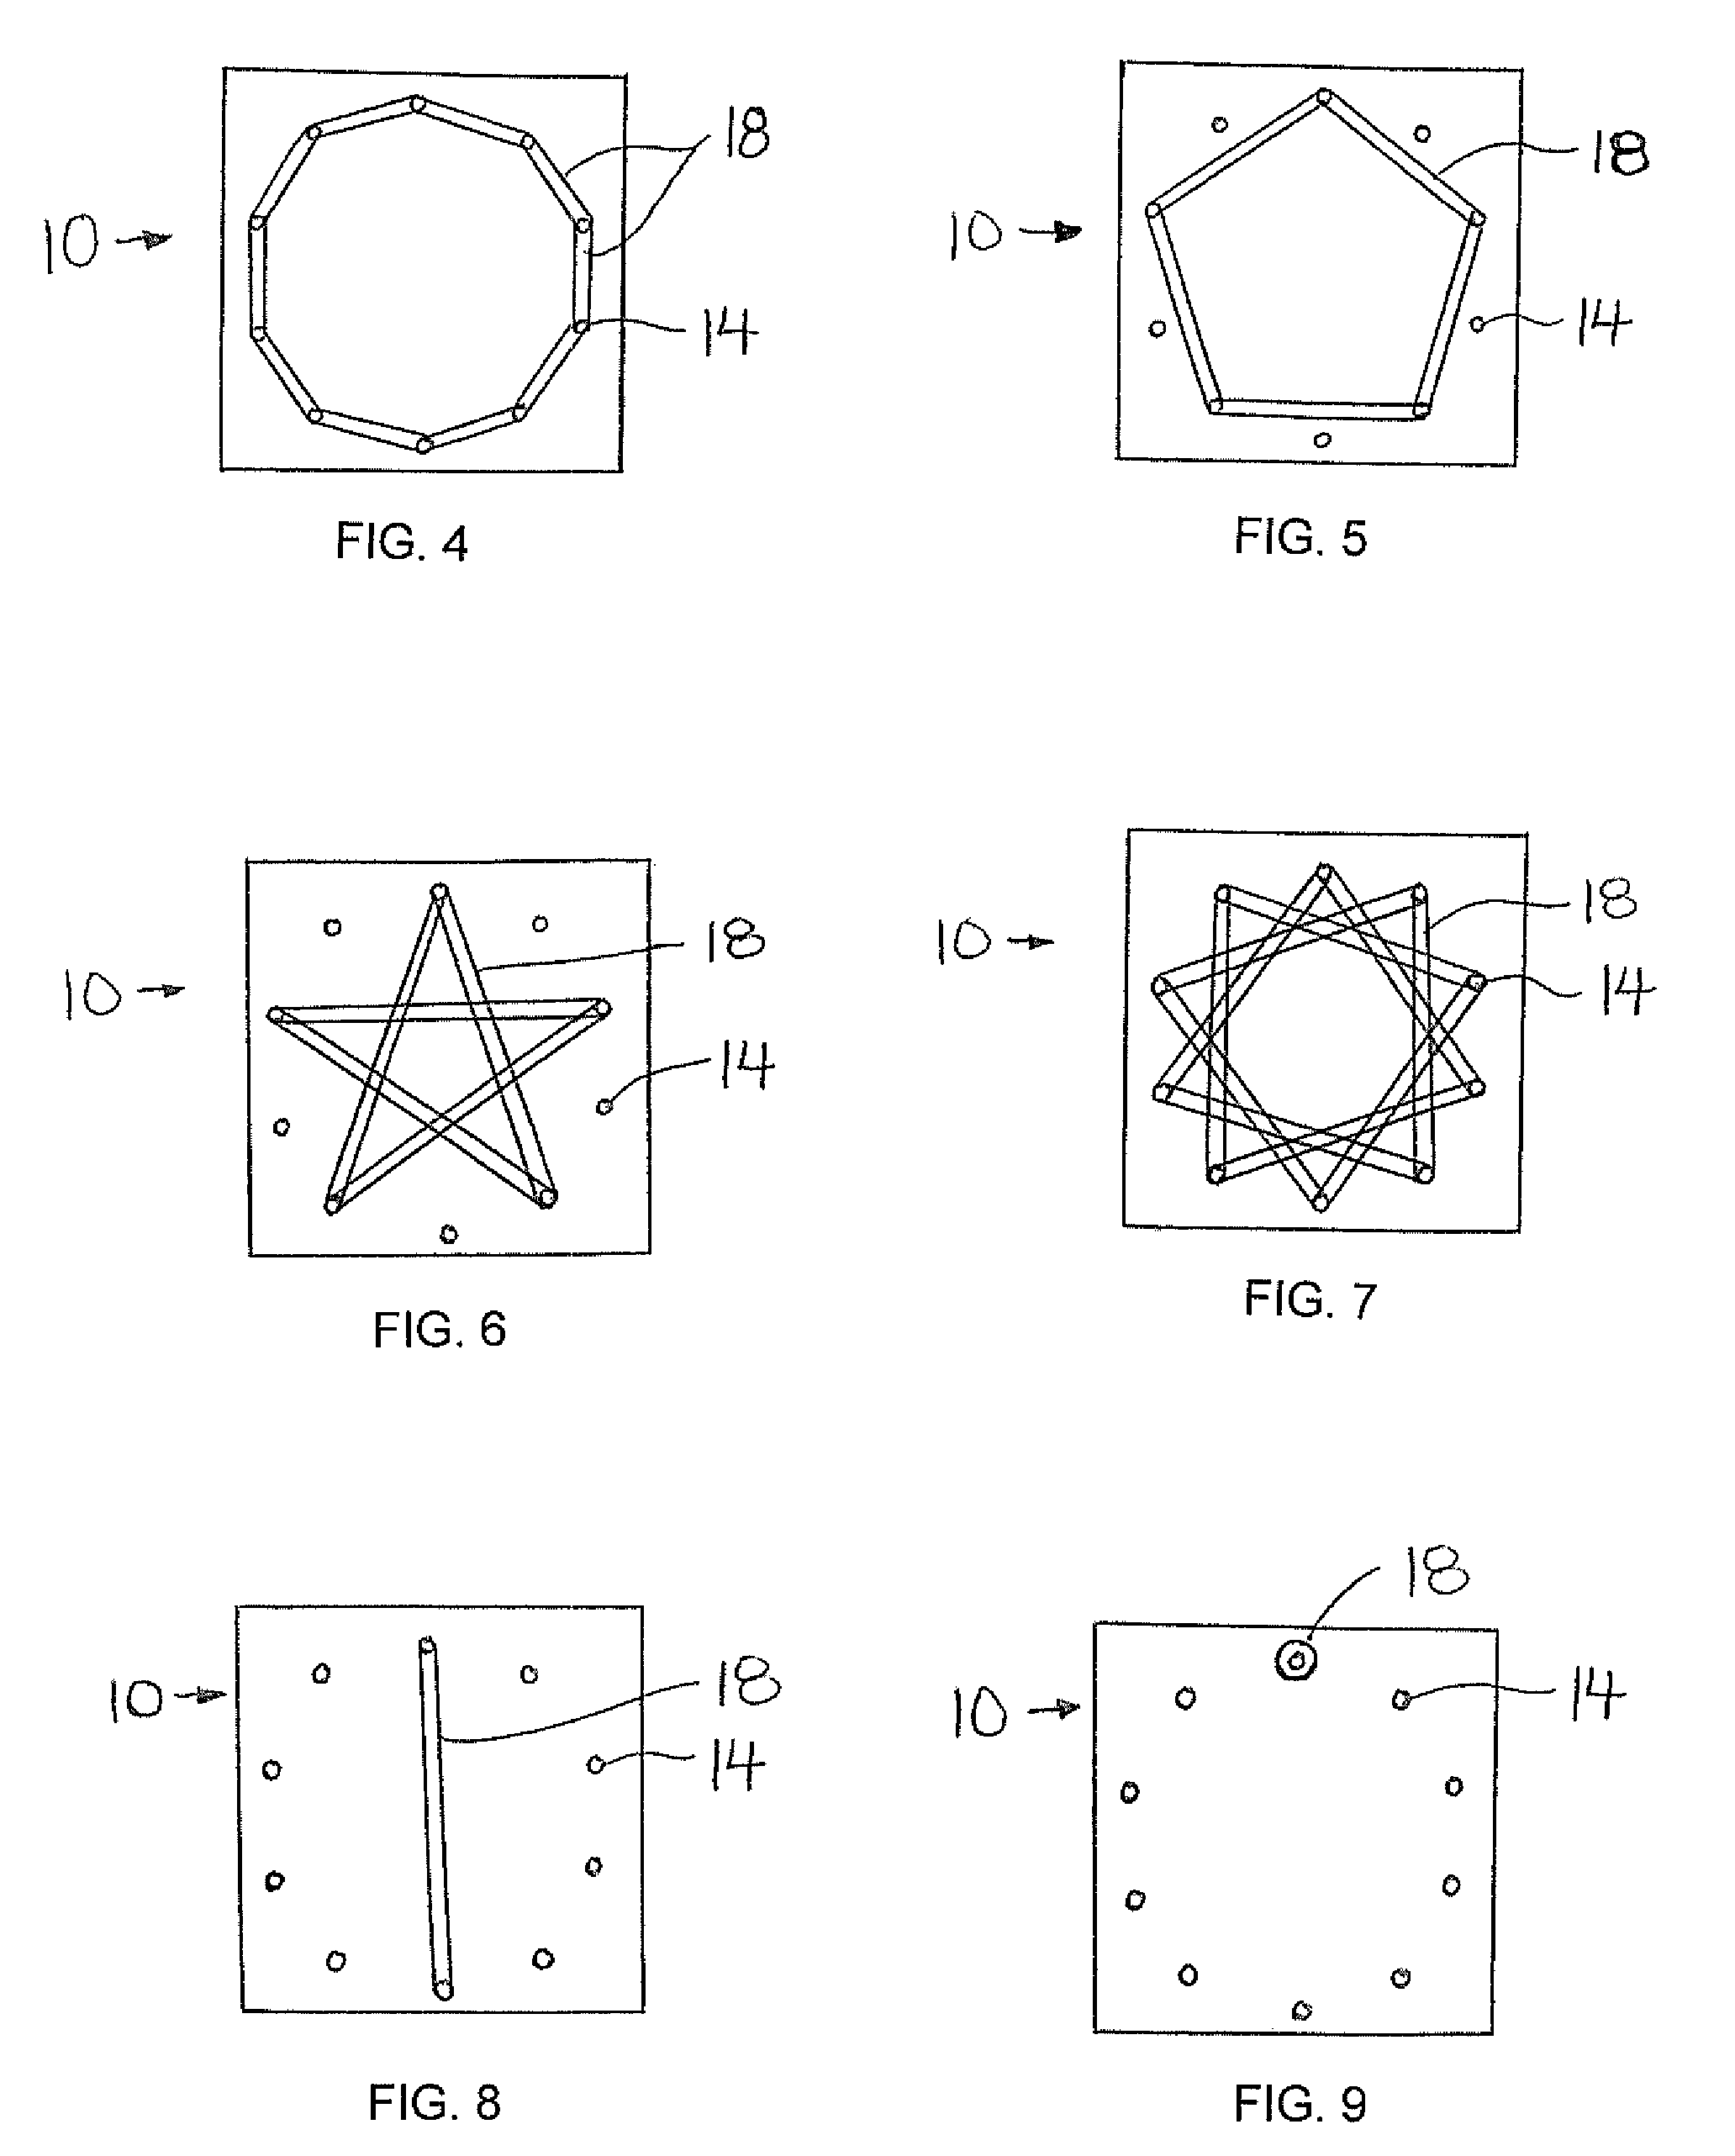 Educational device and method of use